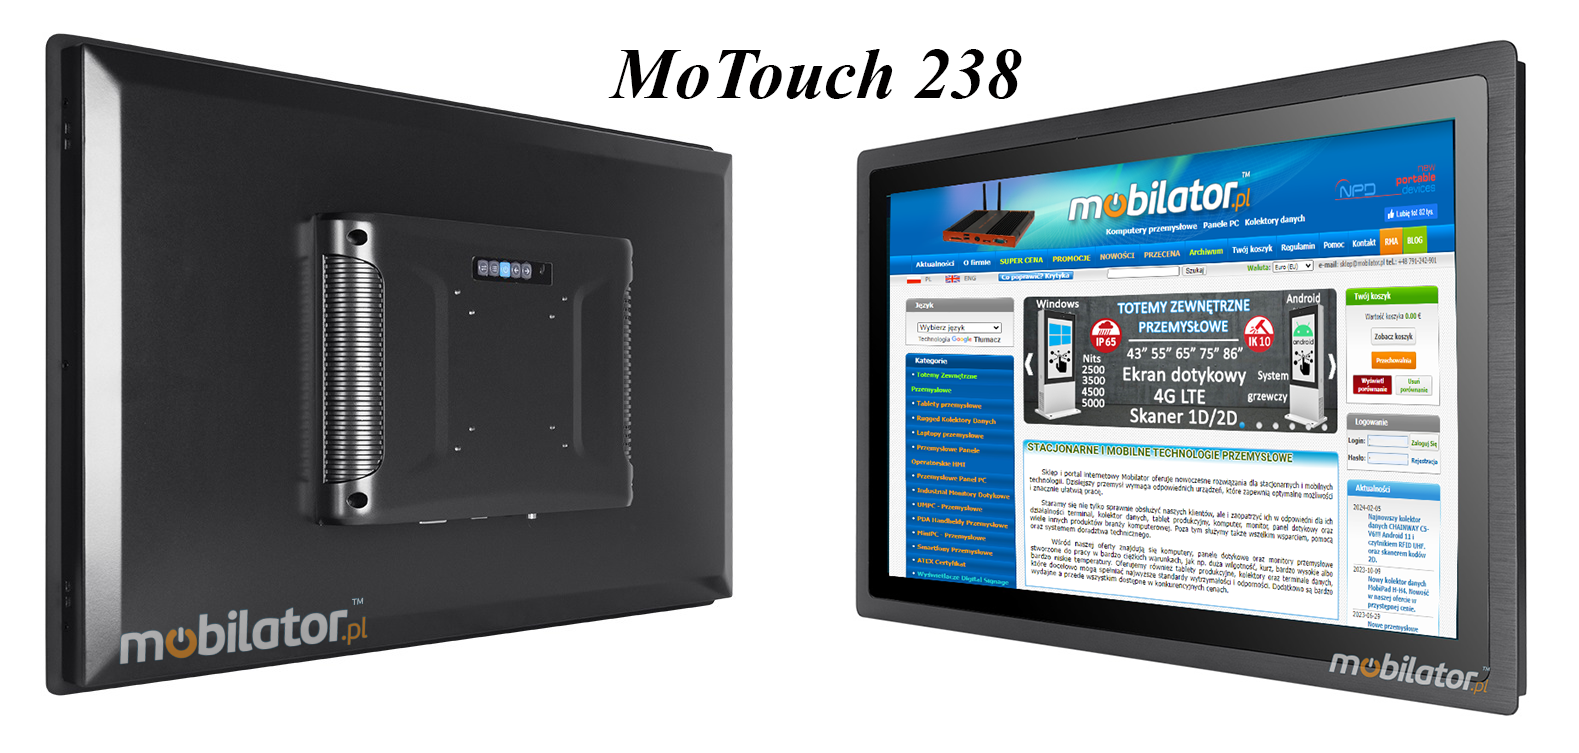 MoTouch 238 -  Industrial Monitor with IP65 on front cover capacitive 238 LCD TFT mobilator.pl New Portable Devices DVI VGA HDMI